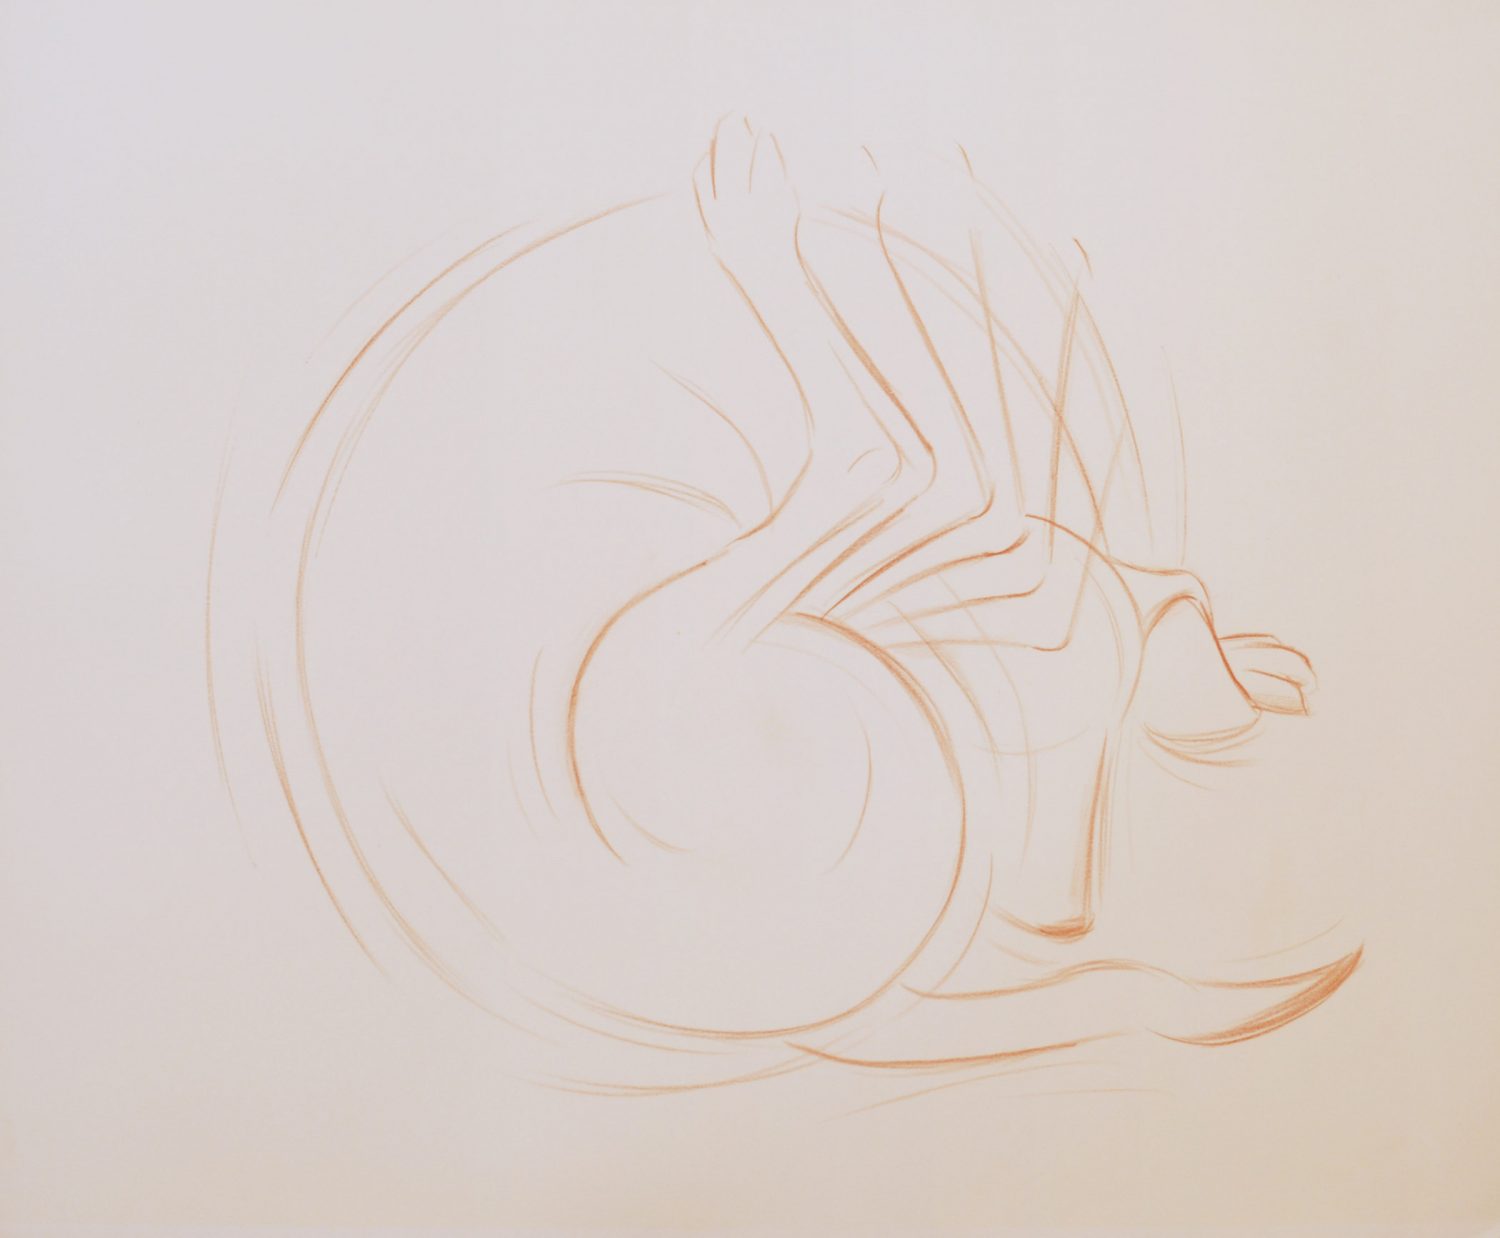 thumbnail of Scratching Dog II by american artist Norman Gorbaty. medium: conte on paper. dimensions: 23 x 30 inches. date: unknown